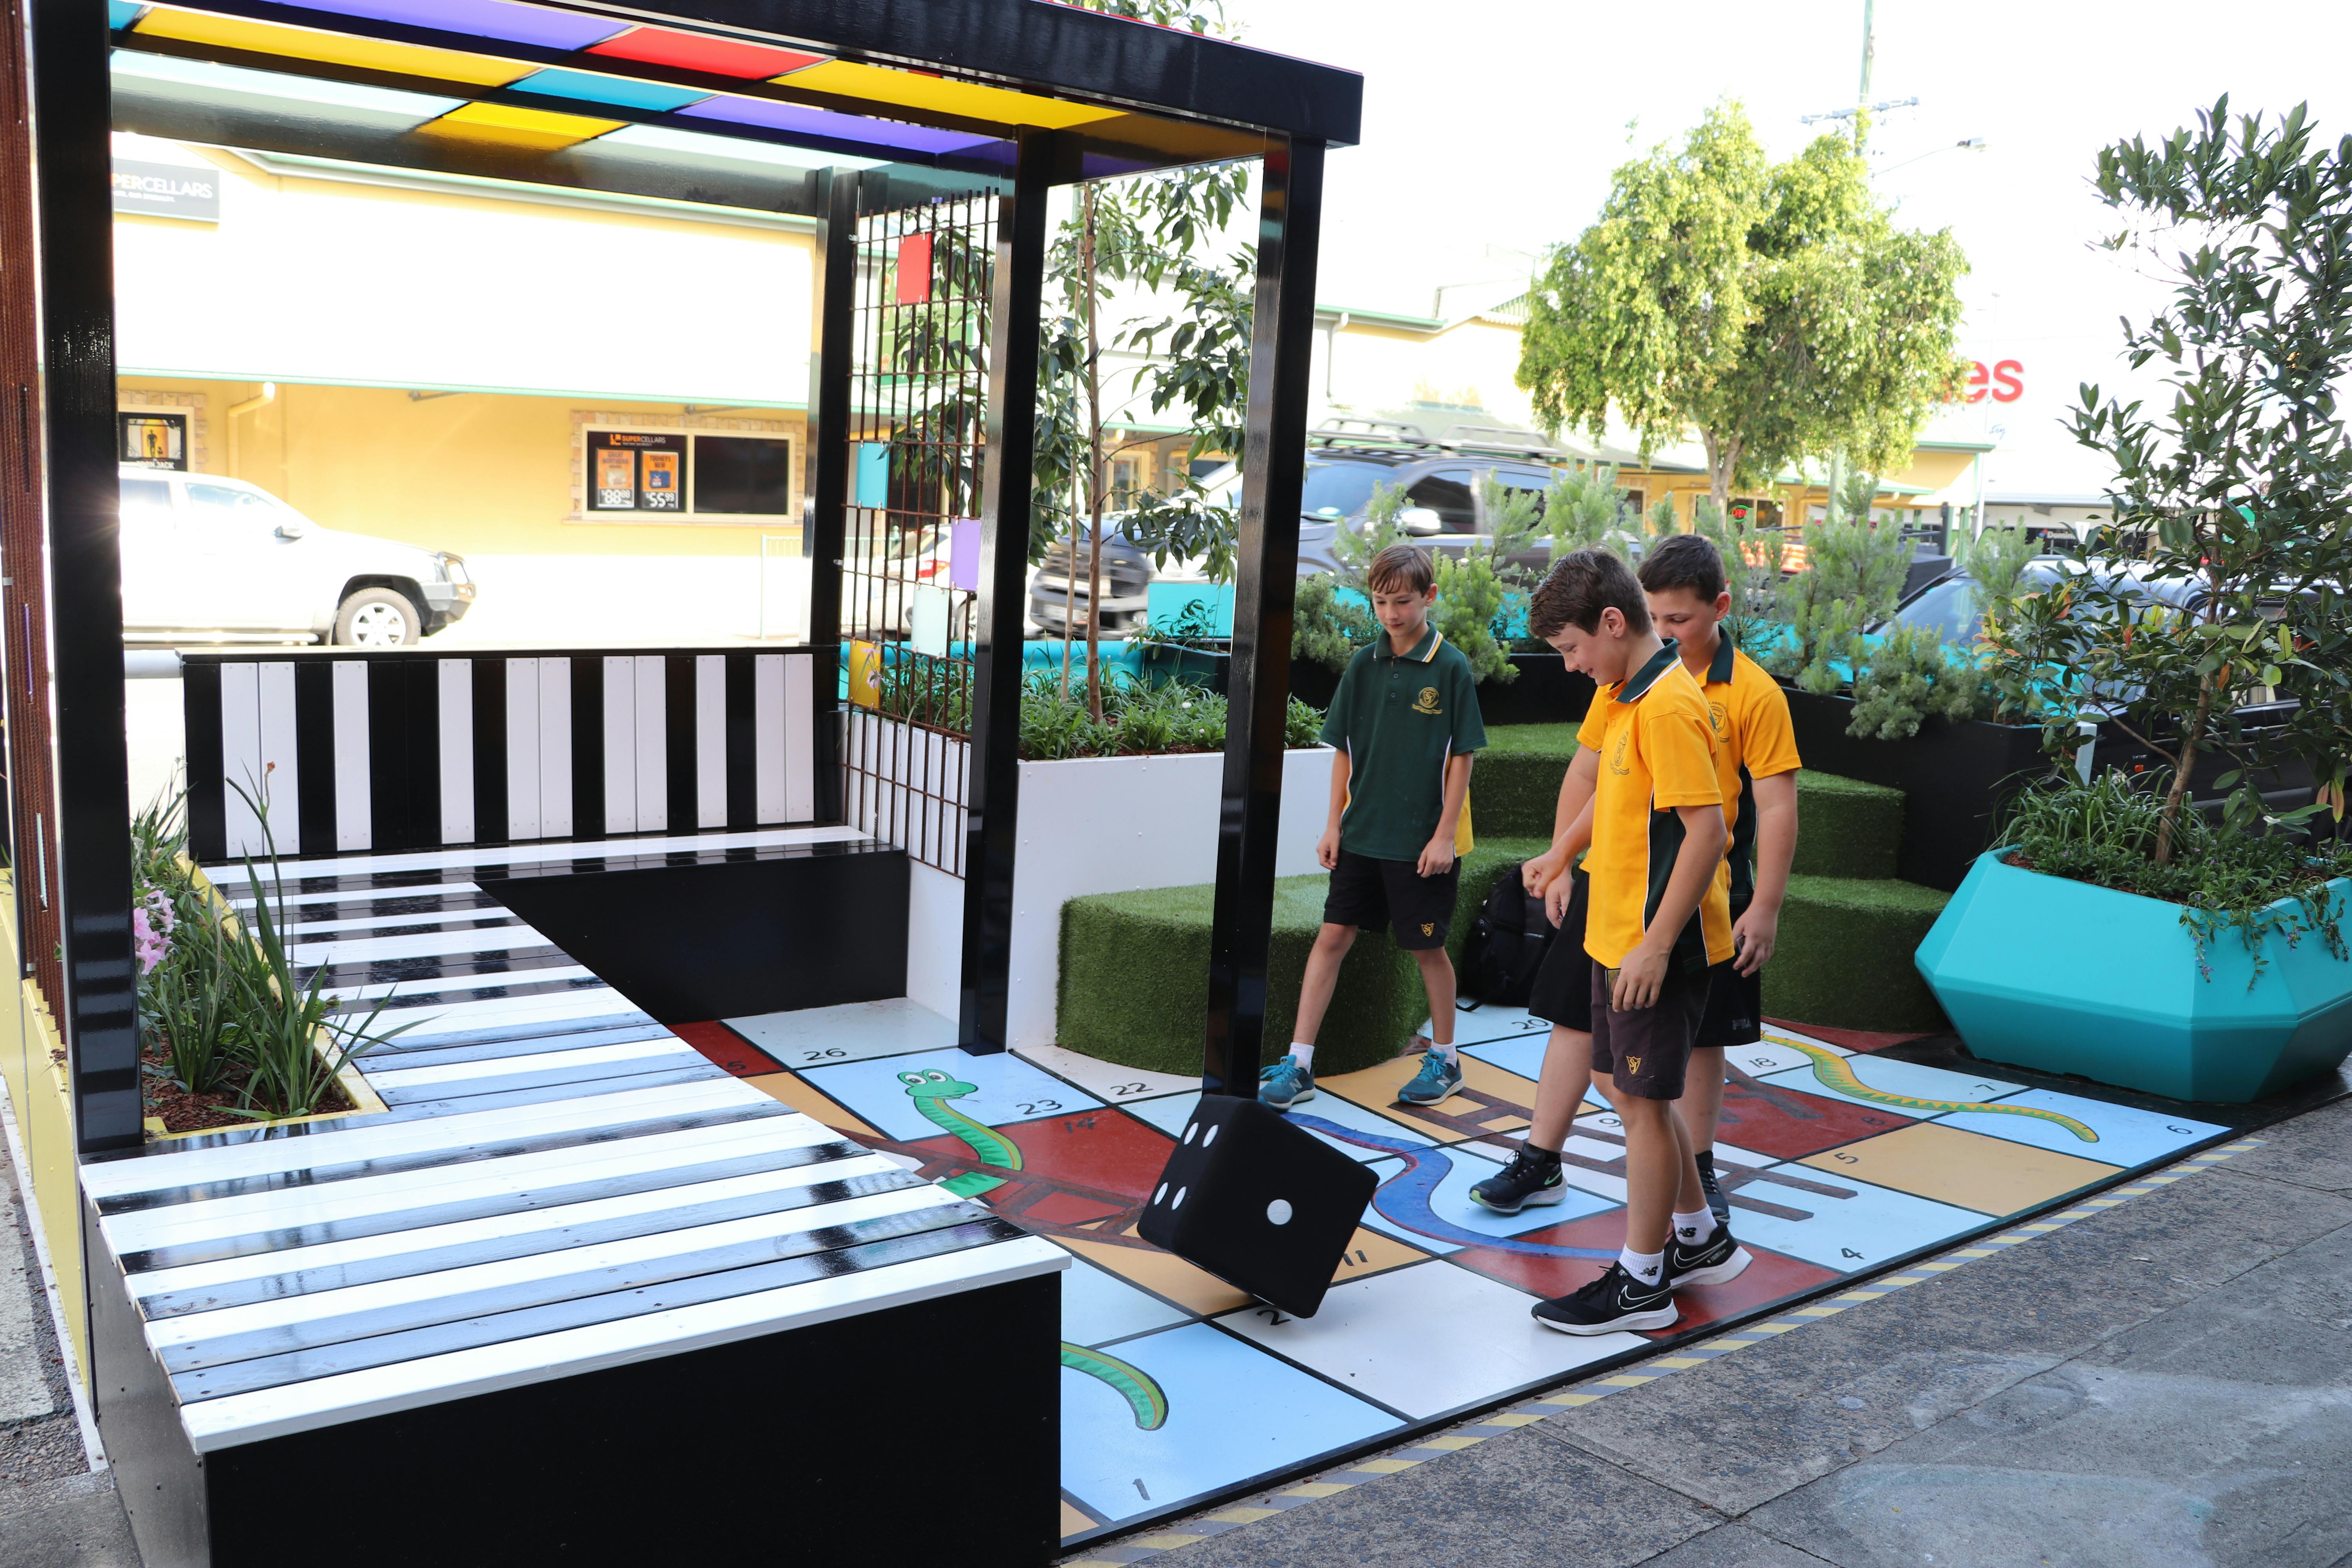 Playing a game of snakes and ladders at the Brisbane Street parklet